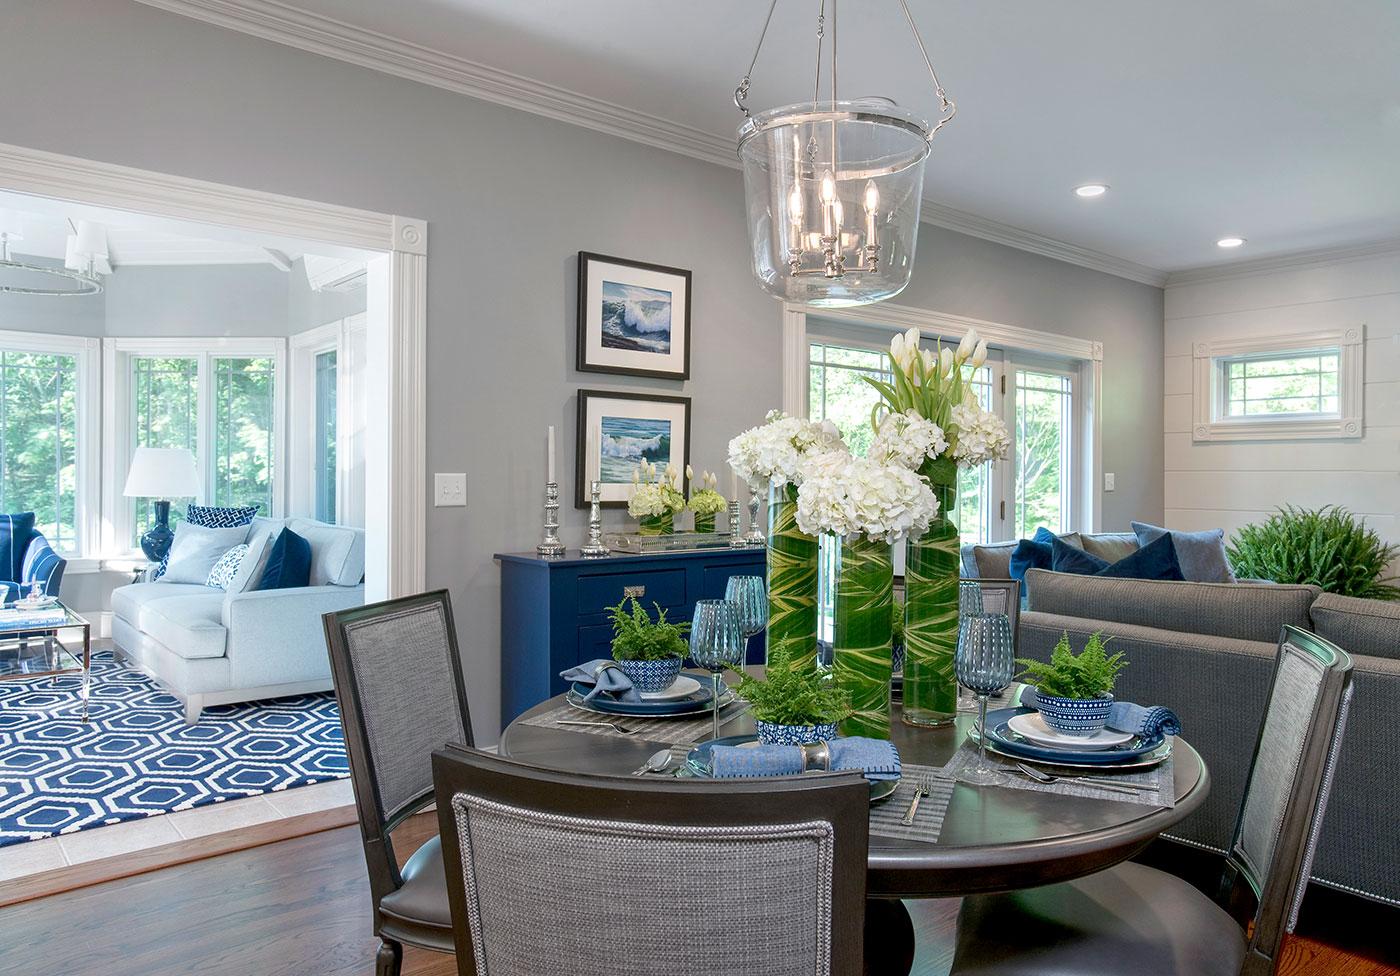 Elegant dining room with classic blue